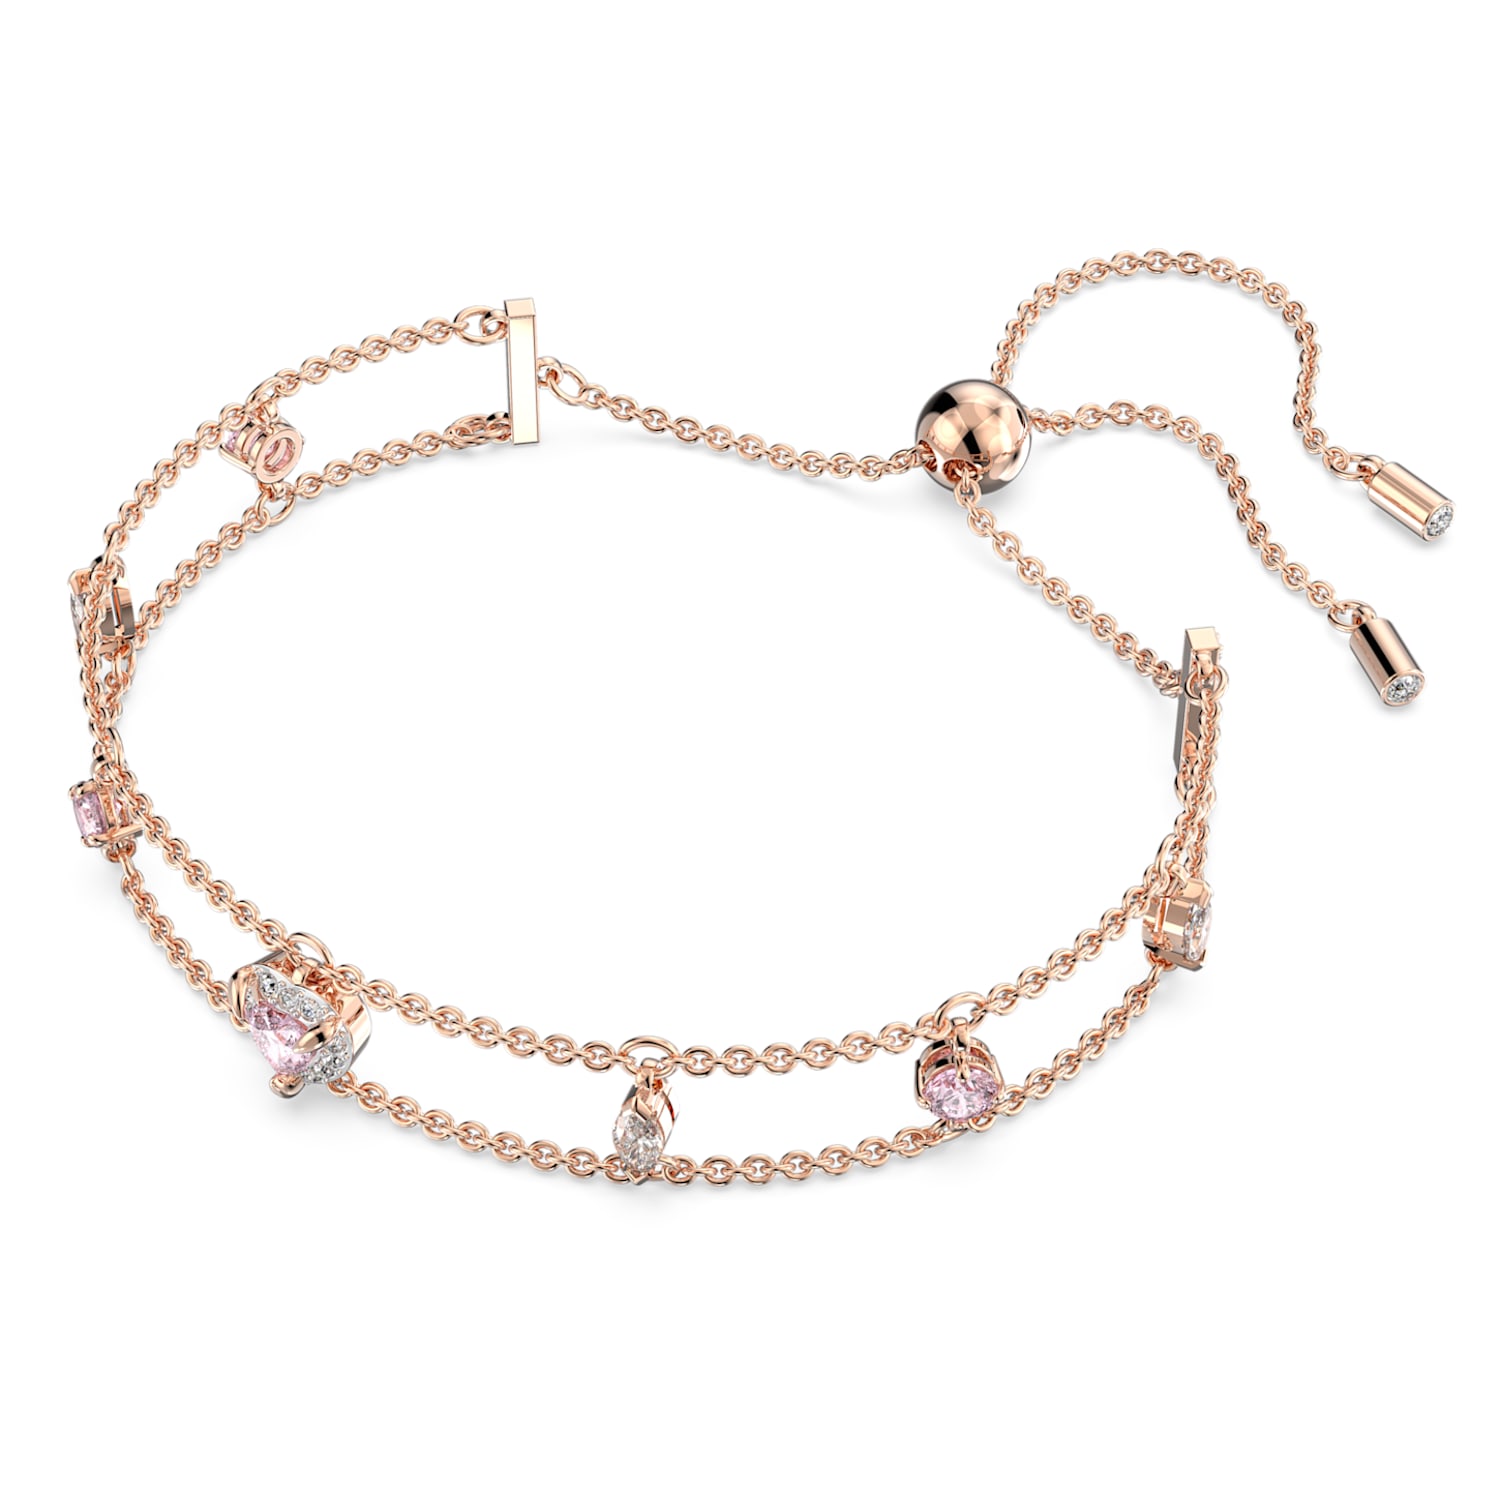 One bracelet, Mixed cuts, Heart, Pink, Rose gold-tone plated 